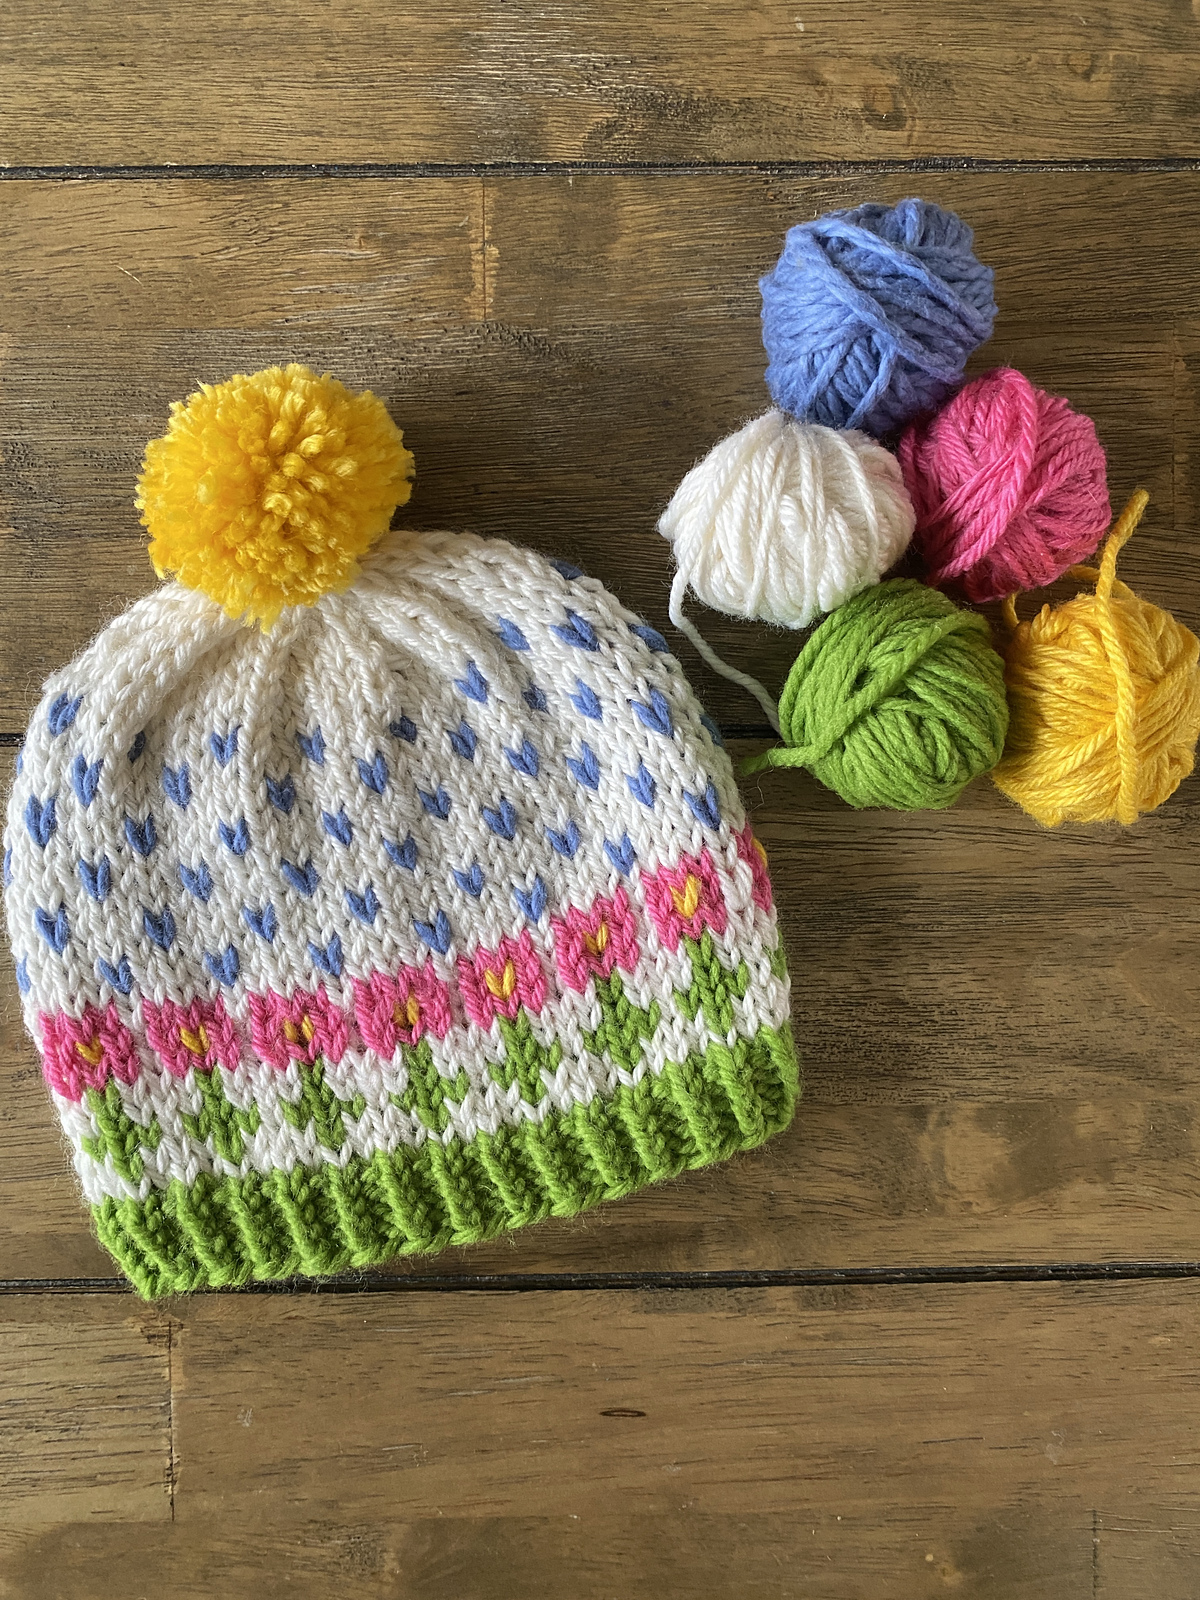 9+ Colorful Patterns to Brighten Winter Knitting - Brown Sheep